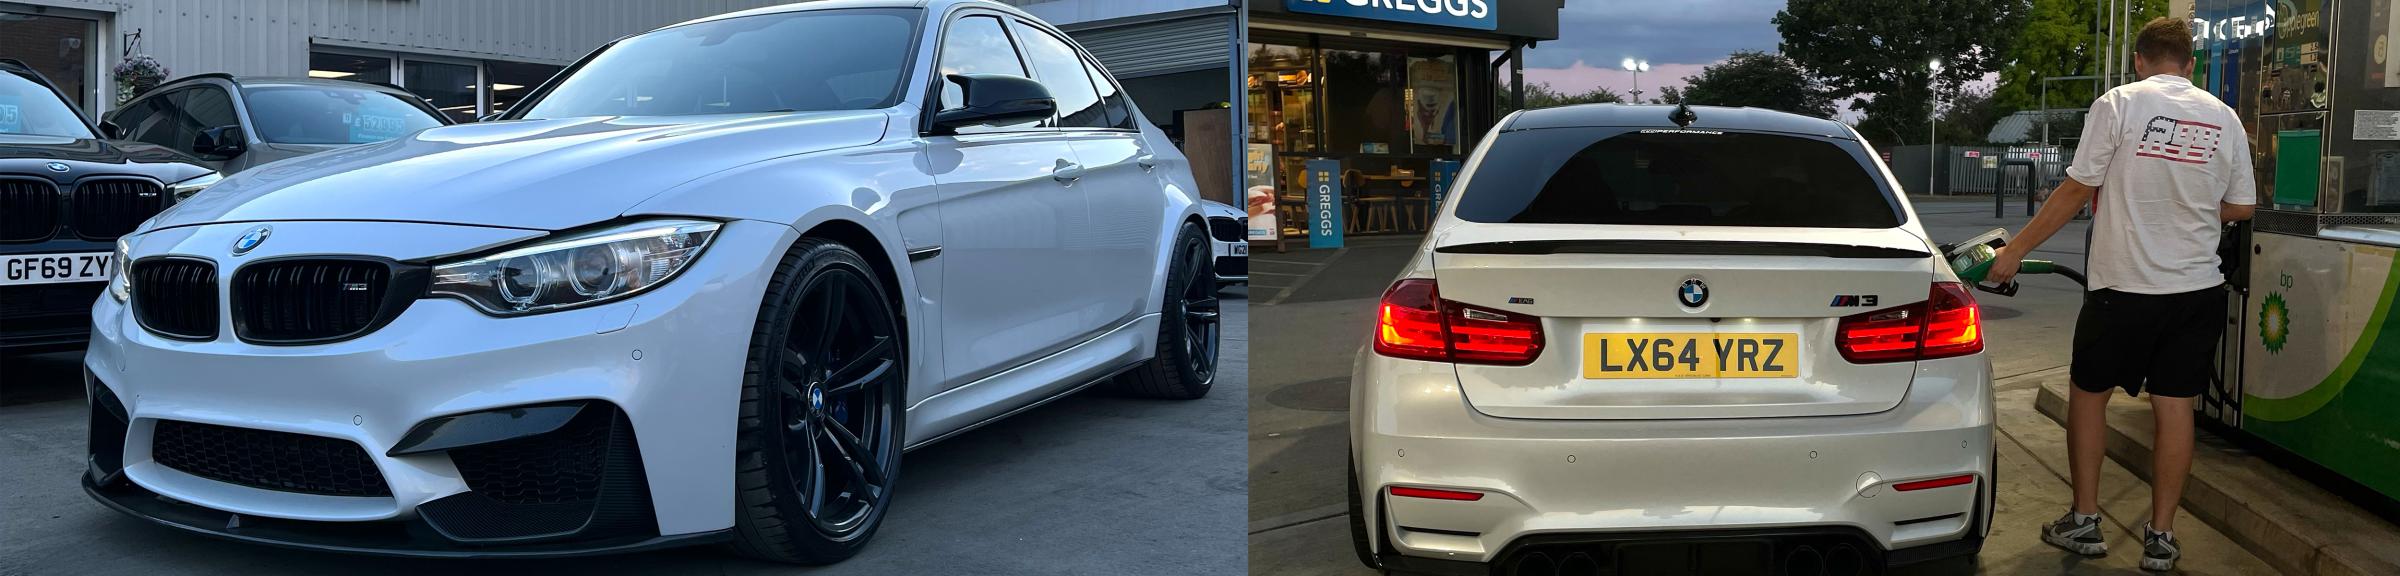 BMW F80 M3 In White | R44 Performance